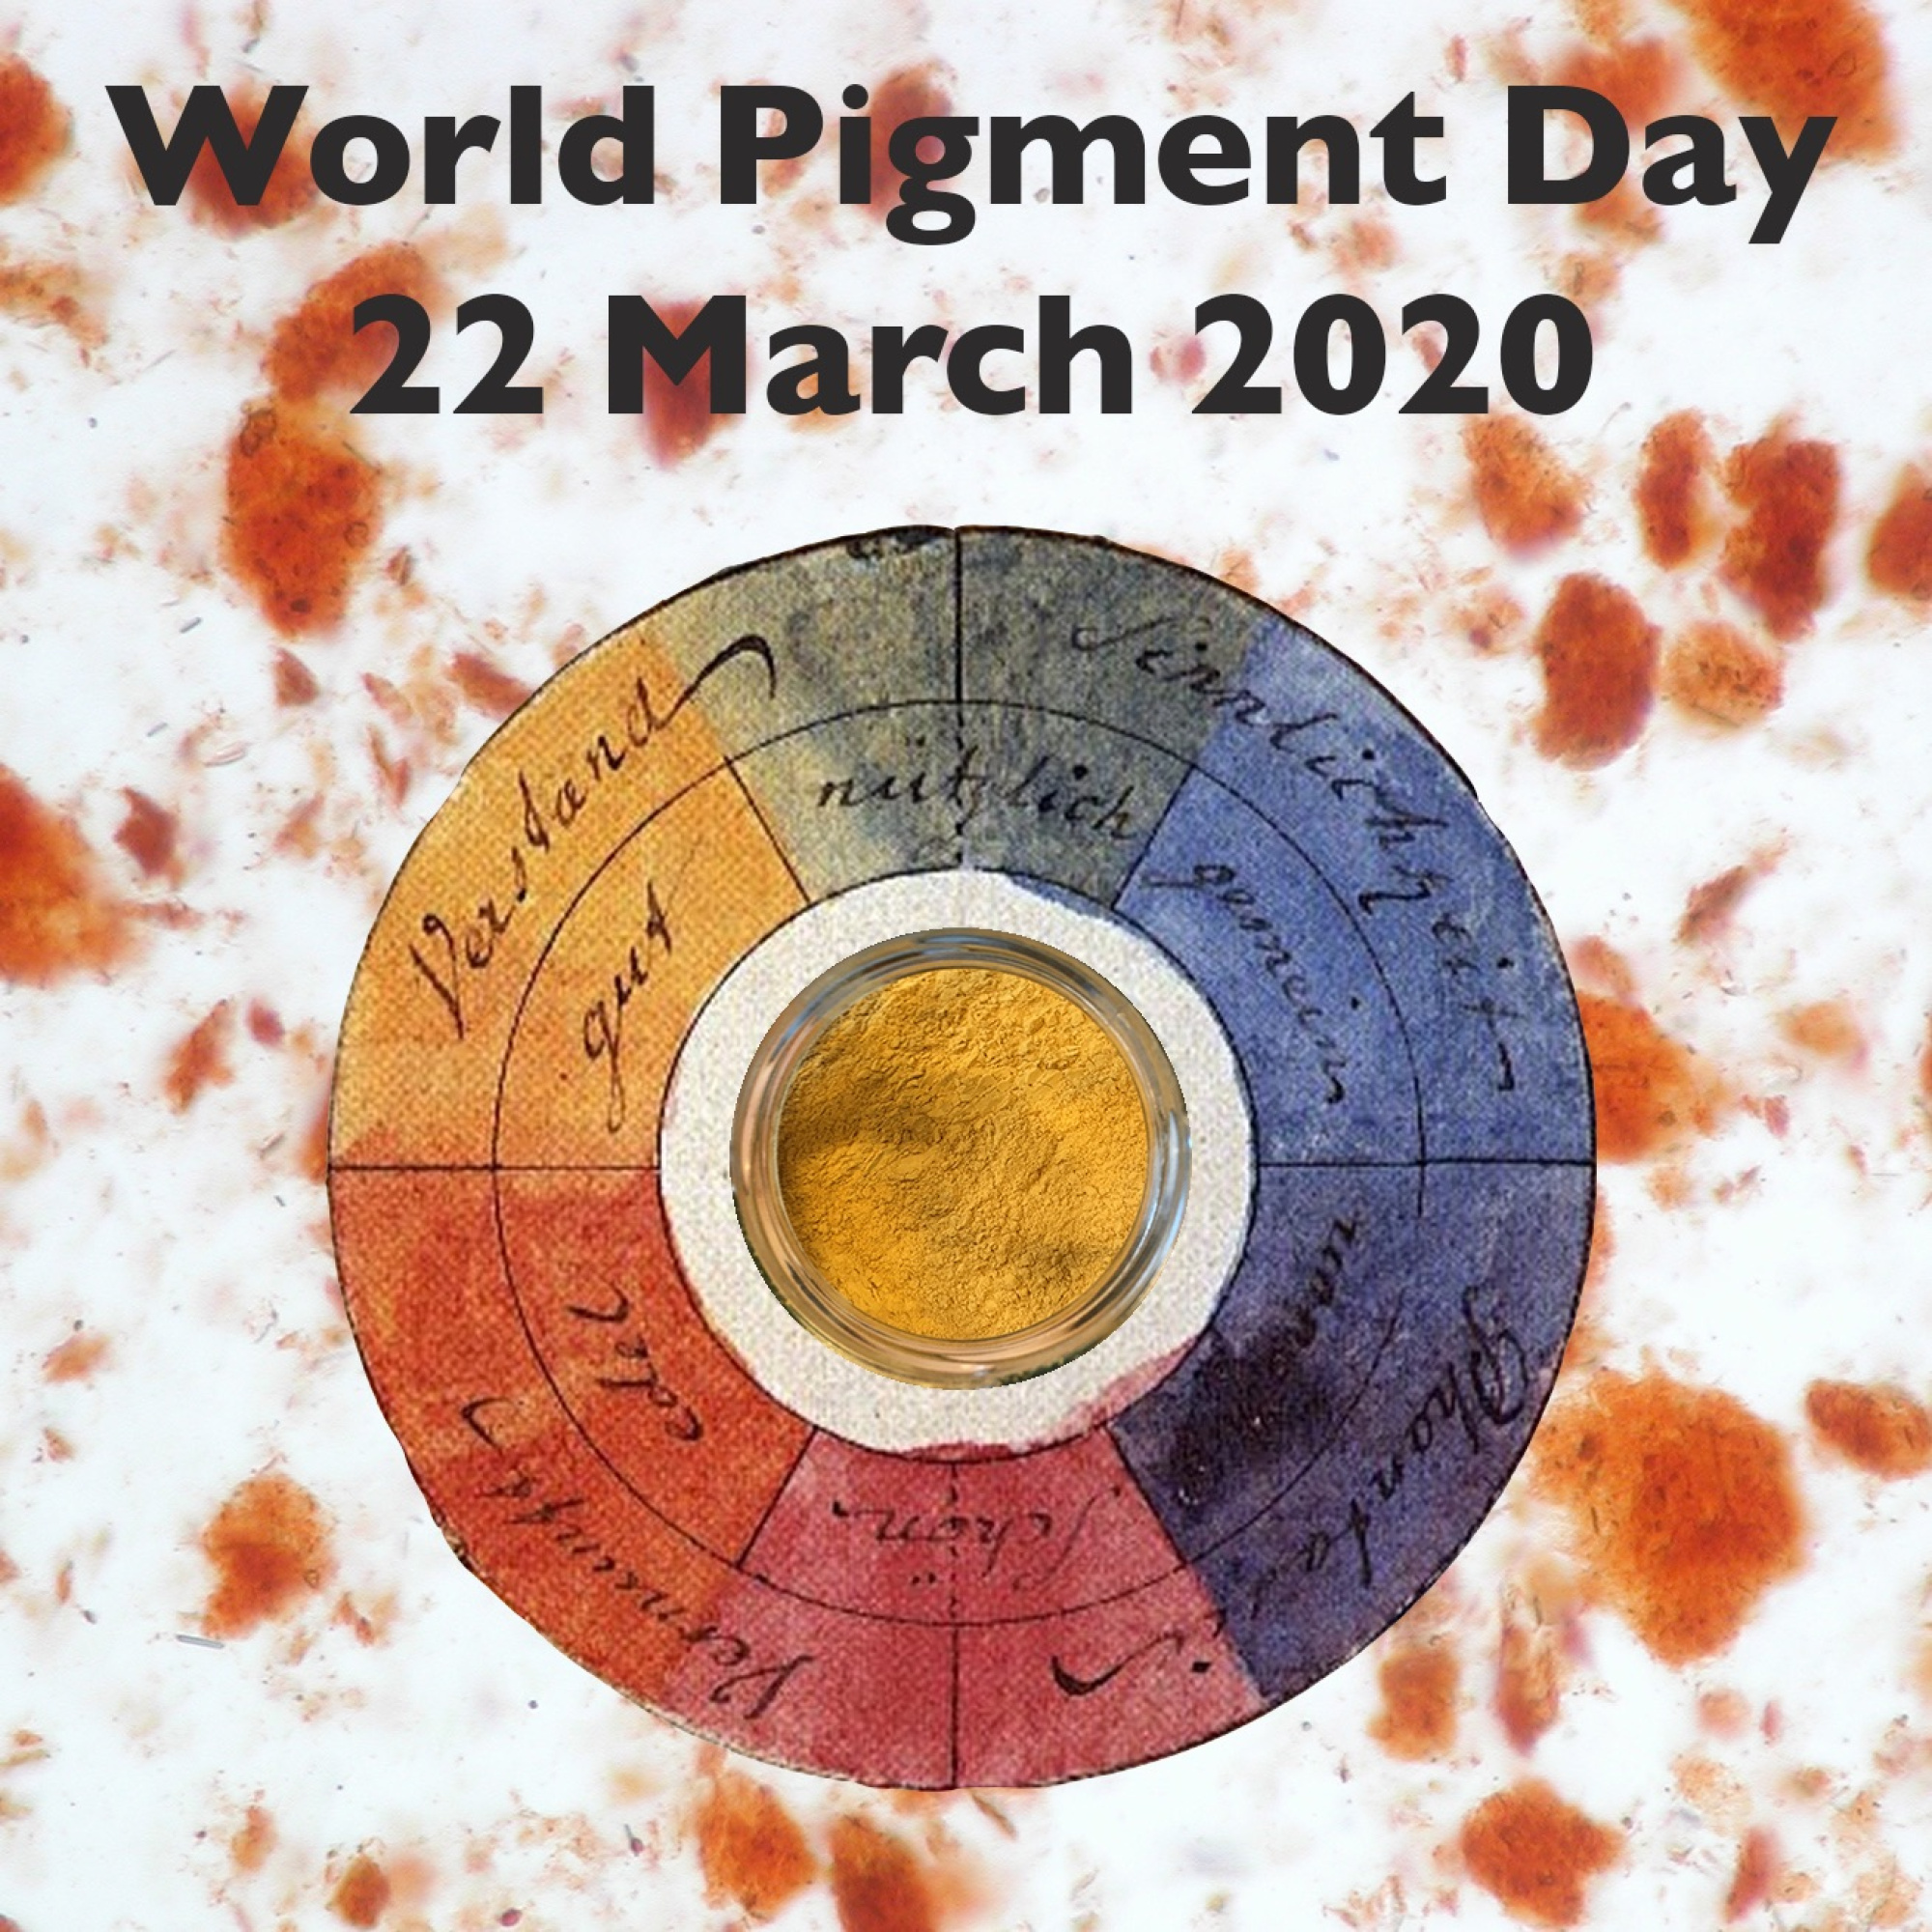 World Pigment Day poster